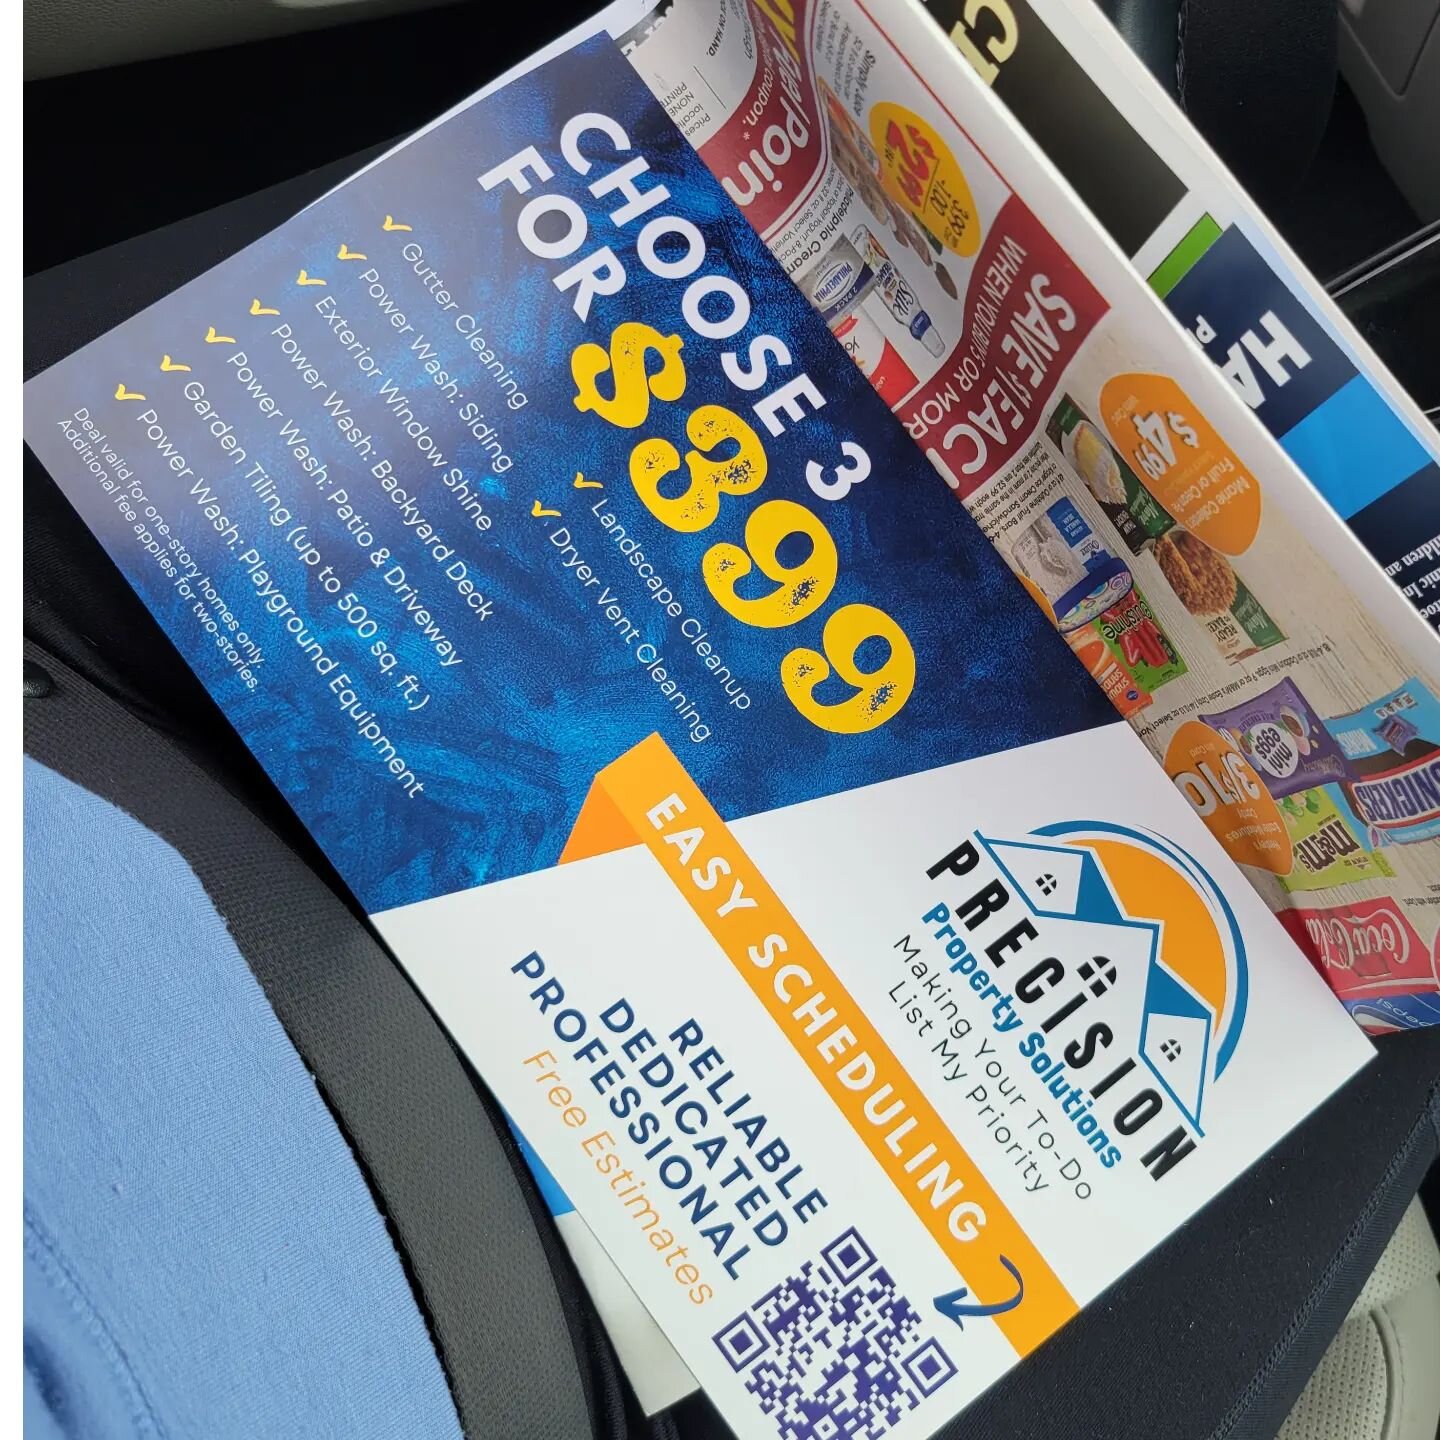 📣 New Service Announcment:

Seeing my client's EDDM mailing mixed in today's mail makes me excited to announce I now offer &quot;Every Door Direct Mail&quot; services to broaden your marketing strategy!

If you have a specific demographic you're try